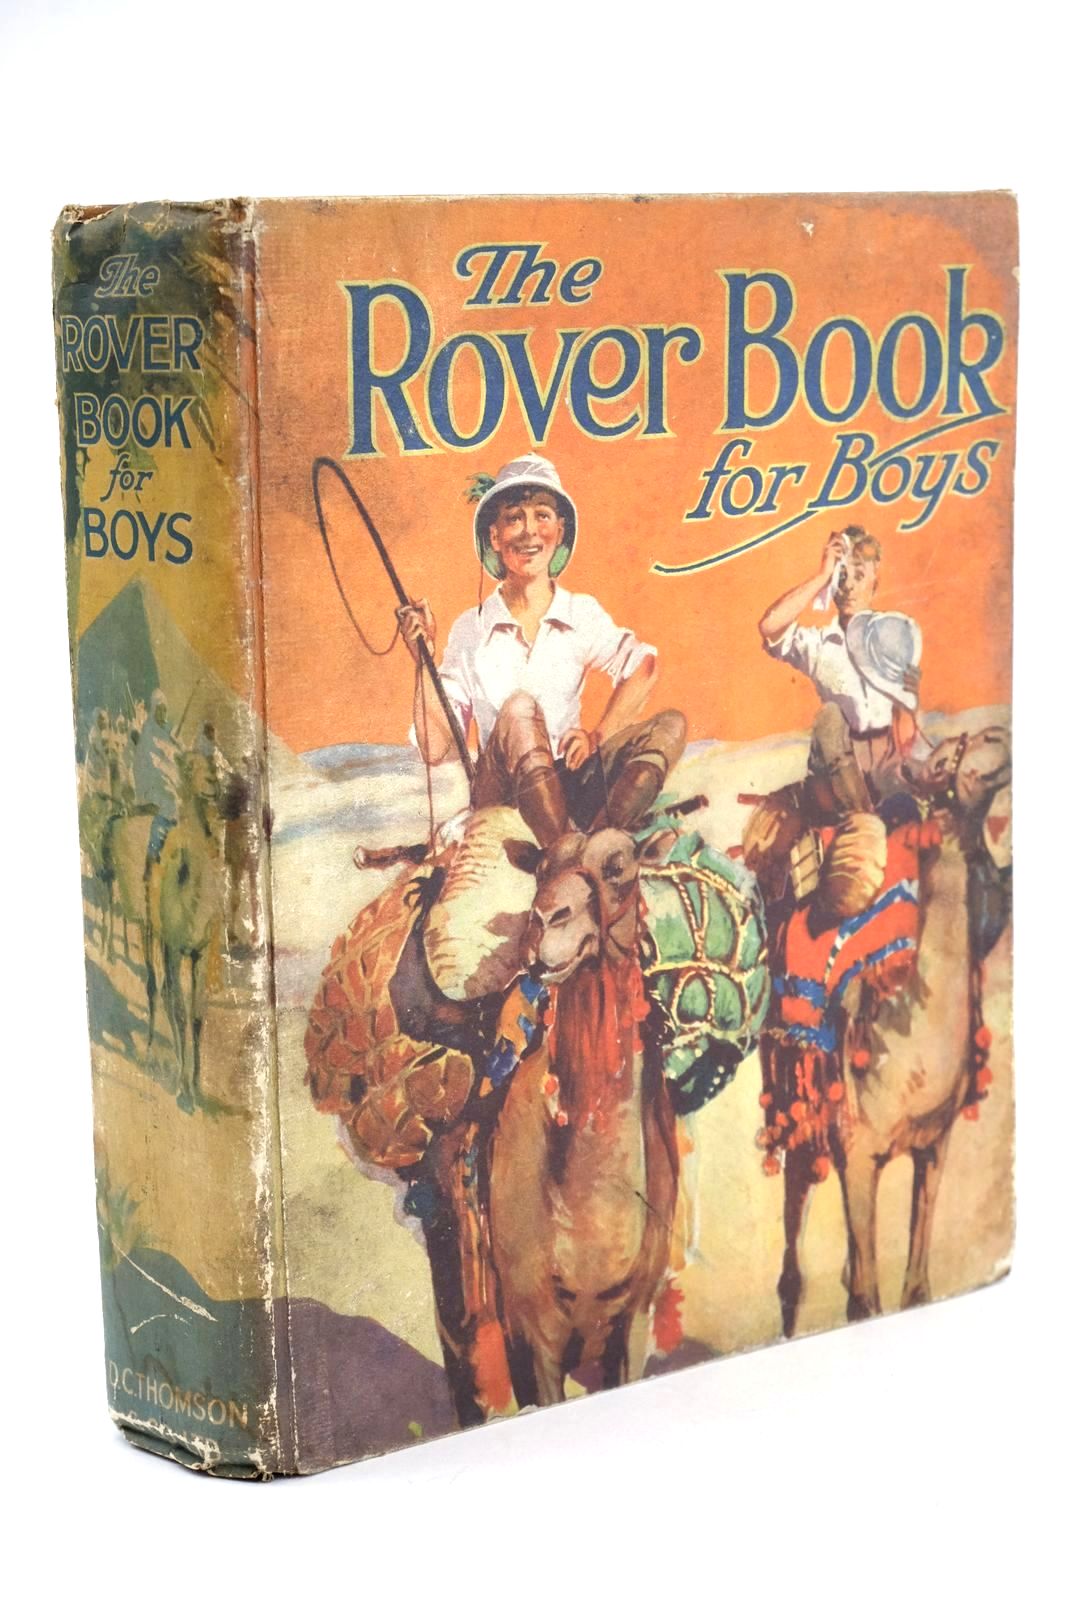 Photo of THE ROVER BOOK FOR BOYS 1929 written by Garden, R.L.
Mitchell, Randolph
Ballantine, Jack
et al, illustrated by Various, published by D.C. Thomson & Co Ltd. (STOCK CODE: 1324787)  for sale by Stella & Rose's Books